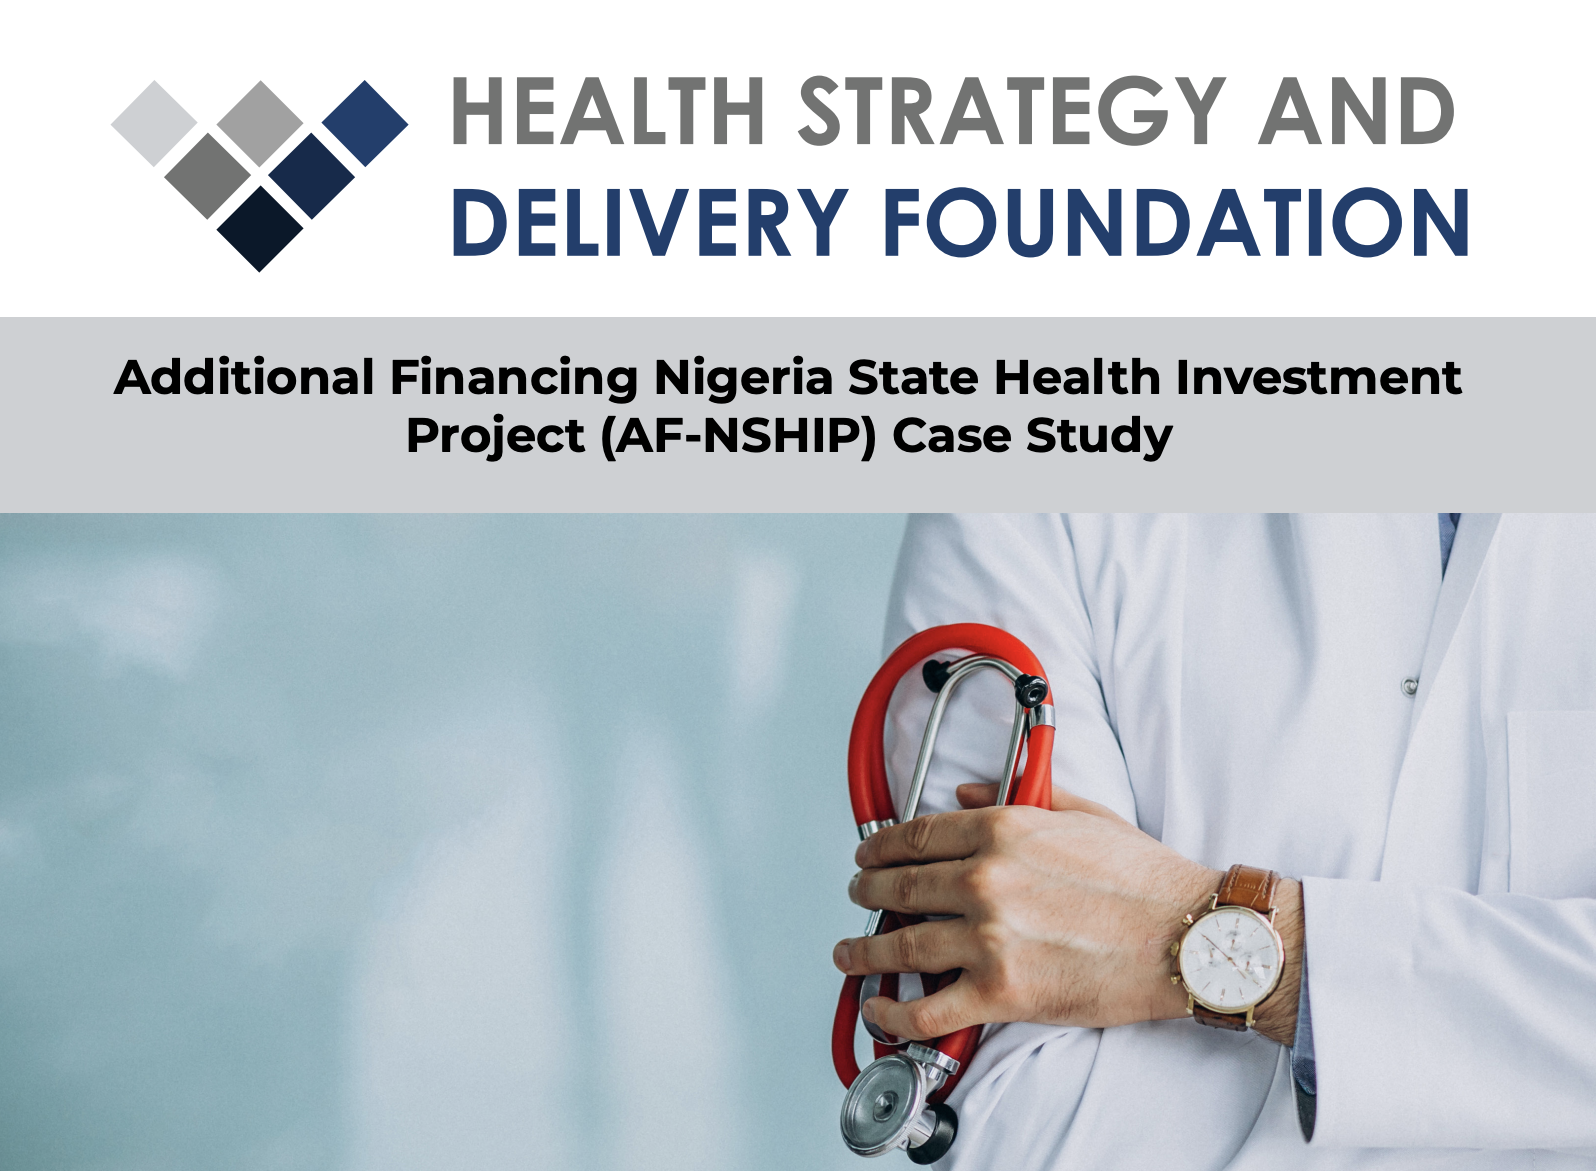 Additional Financing Nigeria State Health Investment Project (AF-NSHIP) Case Study